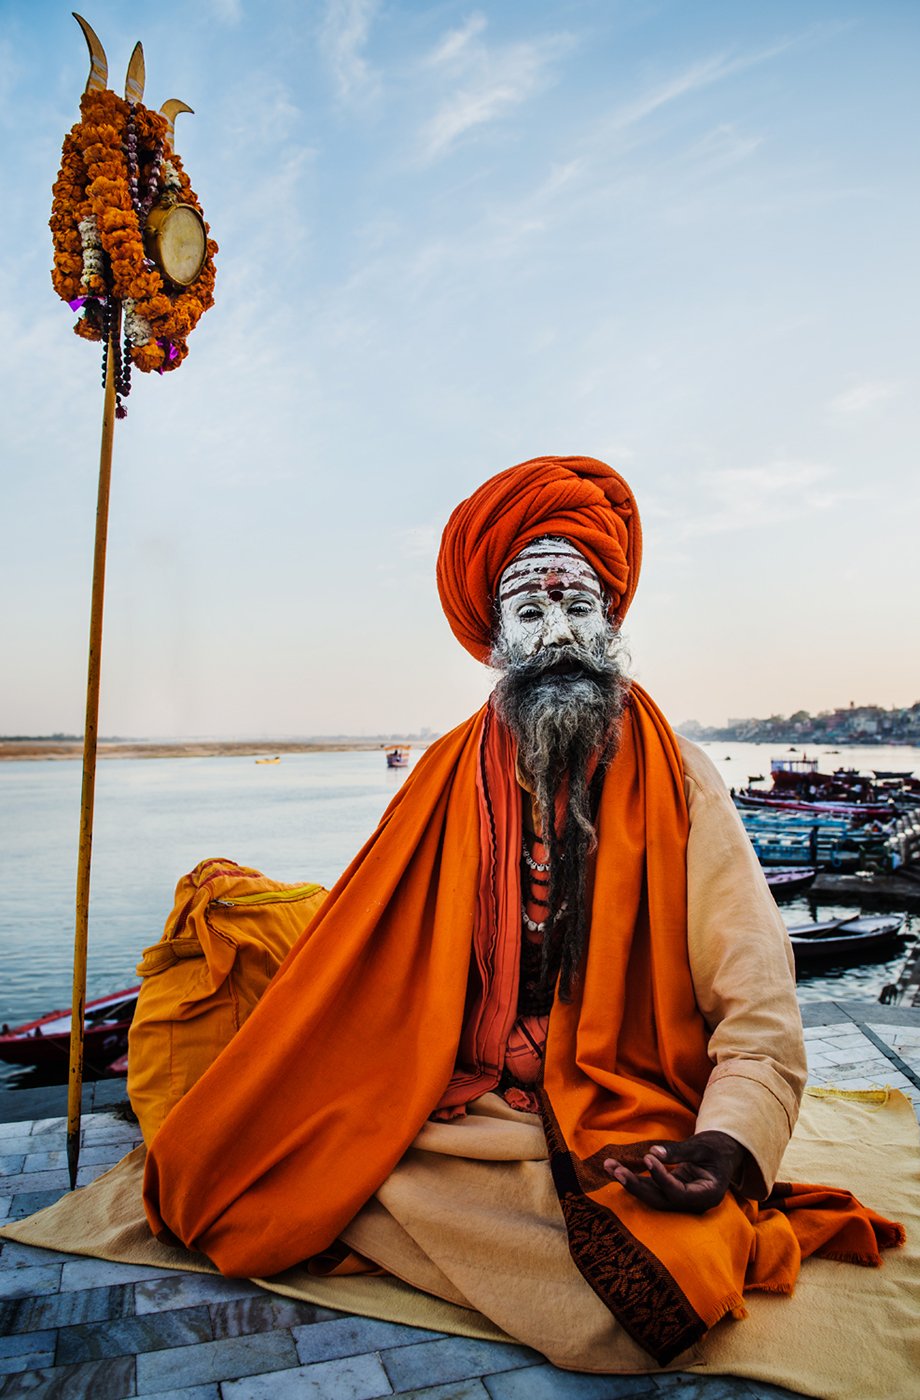 Praying man at Hindu temple on the Ganges in Varanasi shot by Michael Marquand for Lodestars Anthology.